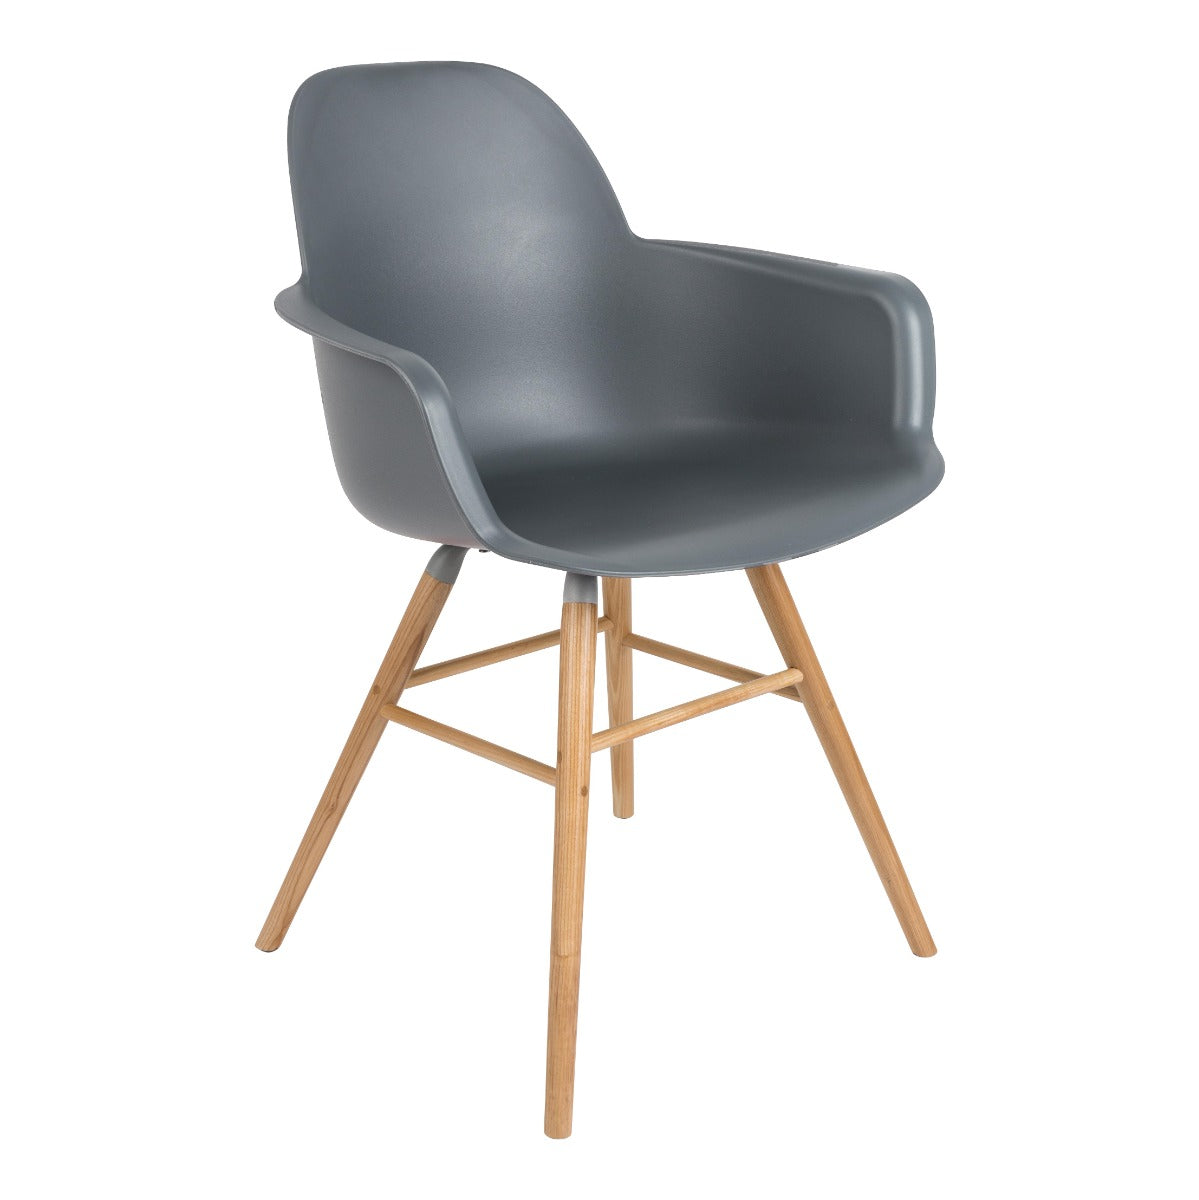 The Alebert Kuip armchair is a combination that will work great both in a modern office as well as in the Scandinavian dining room. The comfort of use is provided by armrests that make you not want to get up. The seat is made of the highest quality plastic in a distinct color. The legs are made of ash wood, which was covered with varnish, which makes them perfectly combined with the aluminum frame, creating extraordinary consistency together.